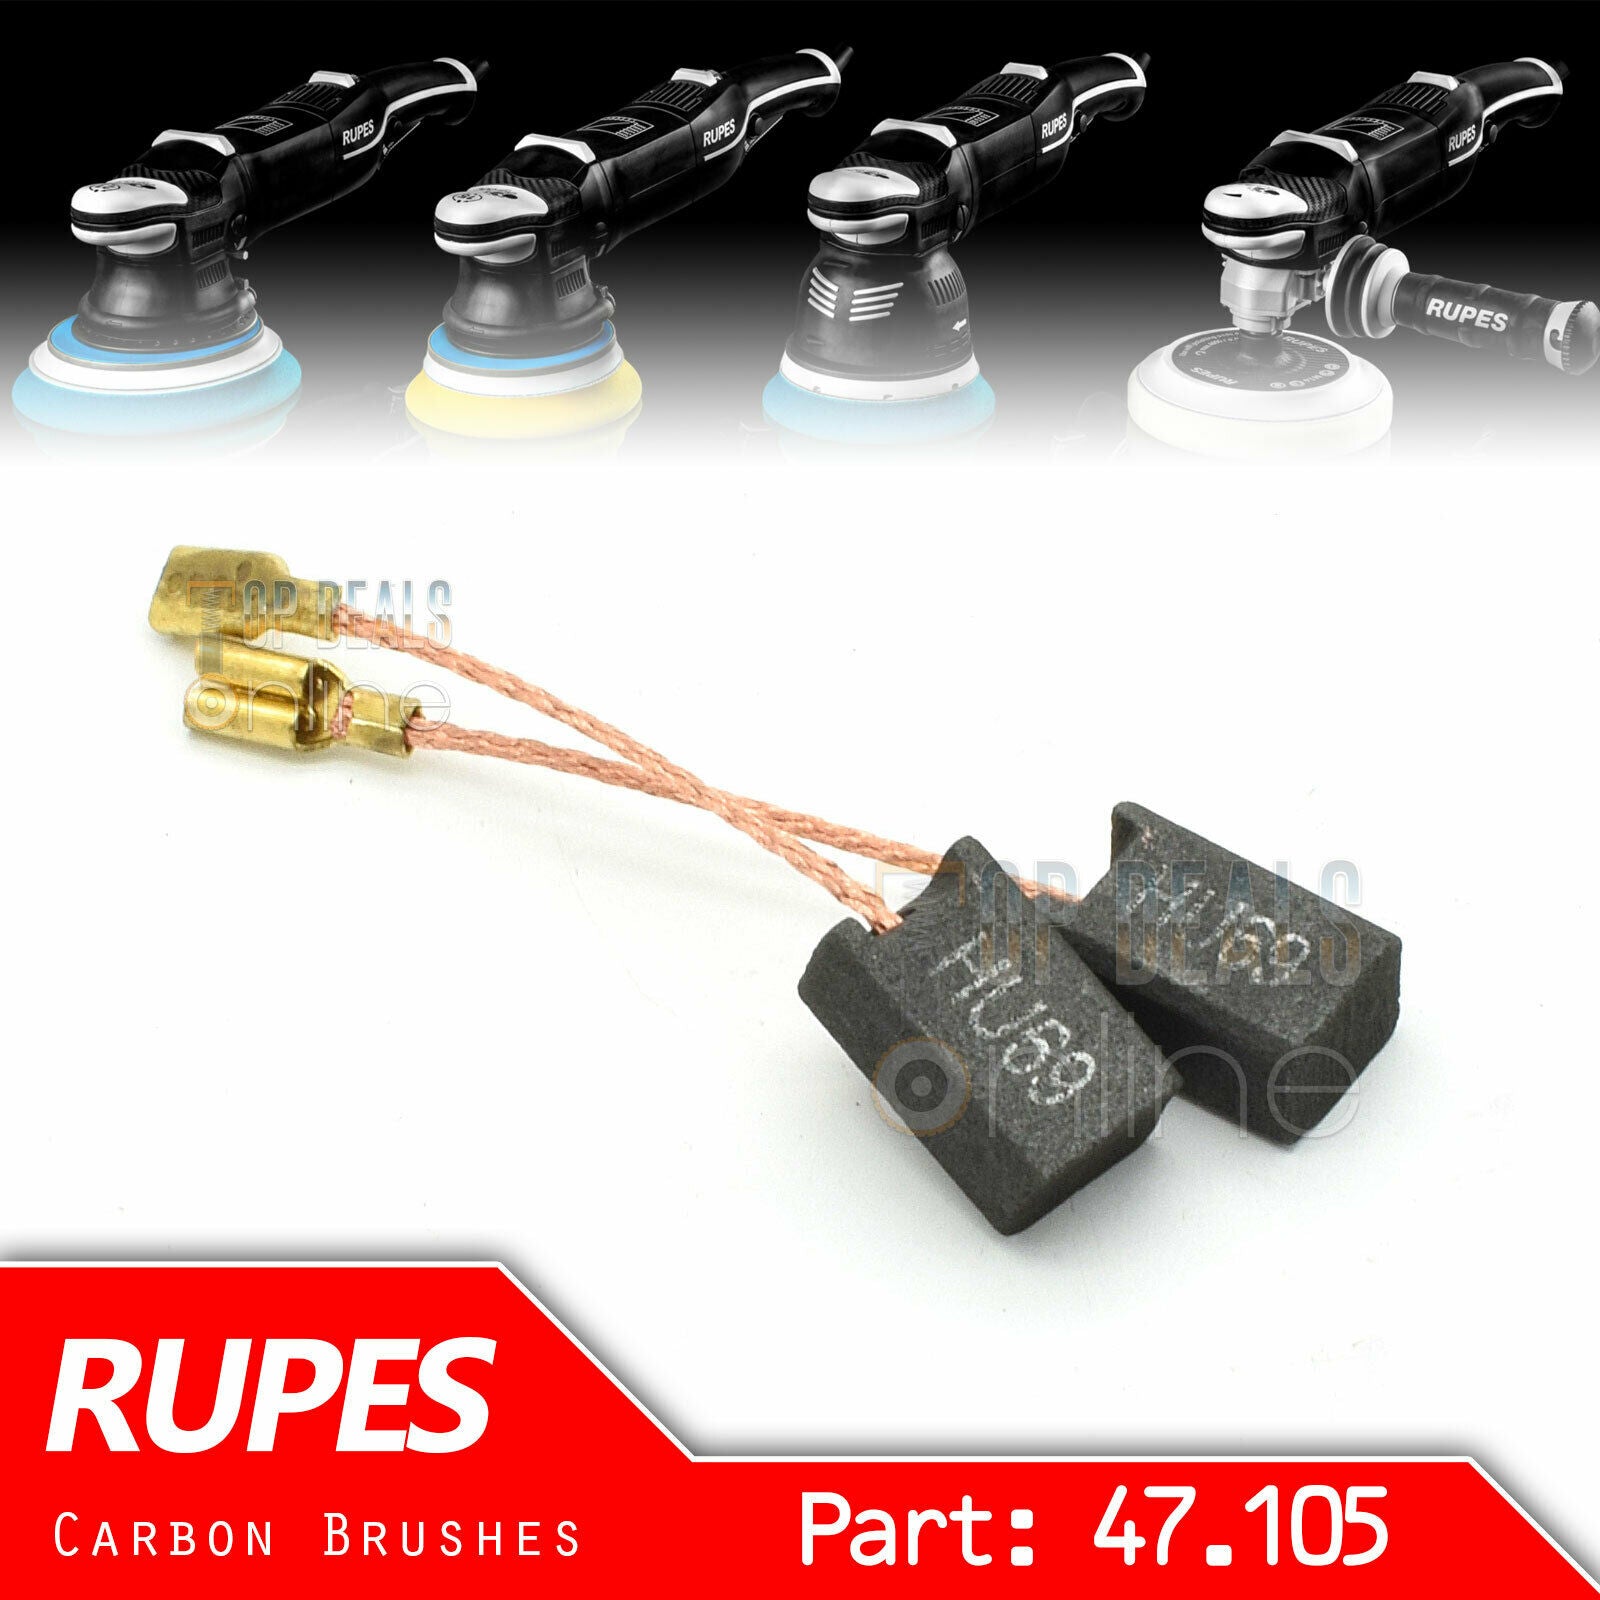 Rupes Carbon Brushes to suit all bigfoot models, Duetto, Mille / LH19 Rotary etc (Pair)